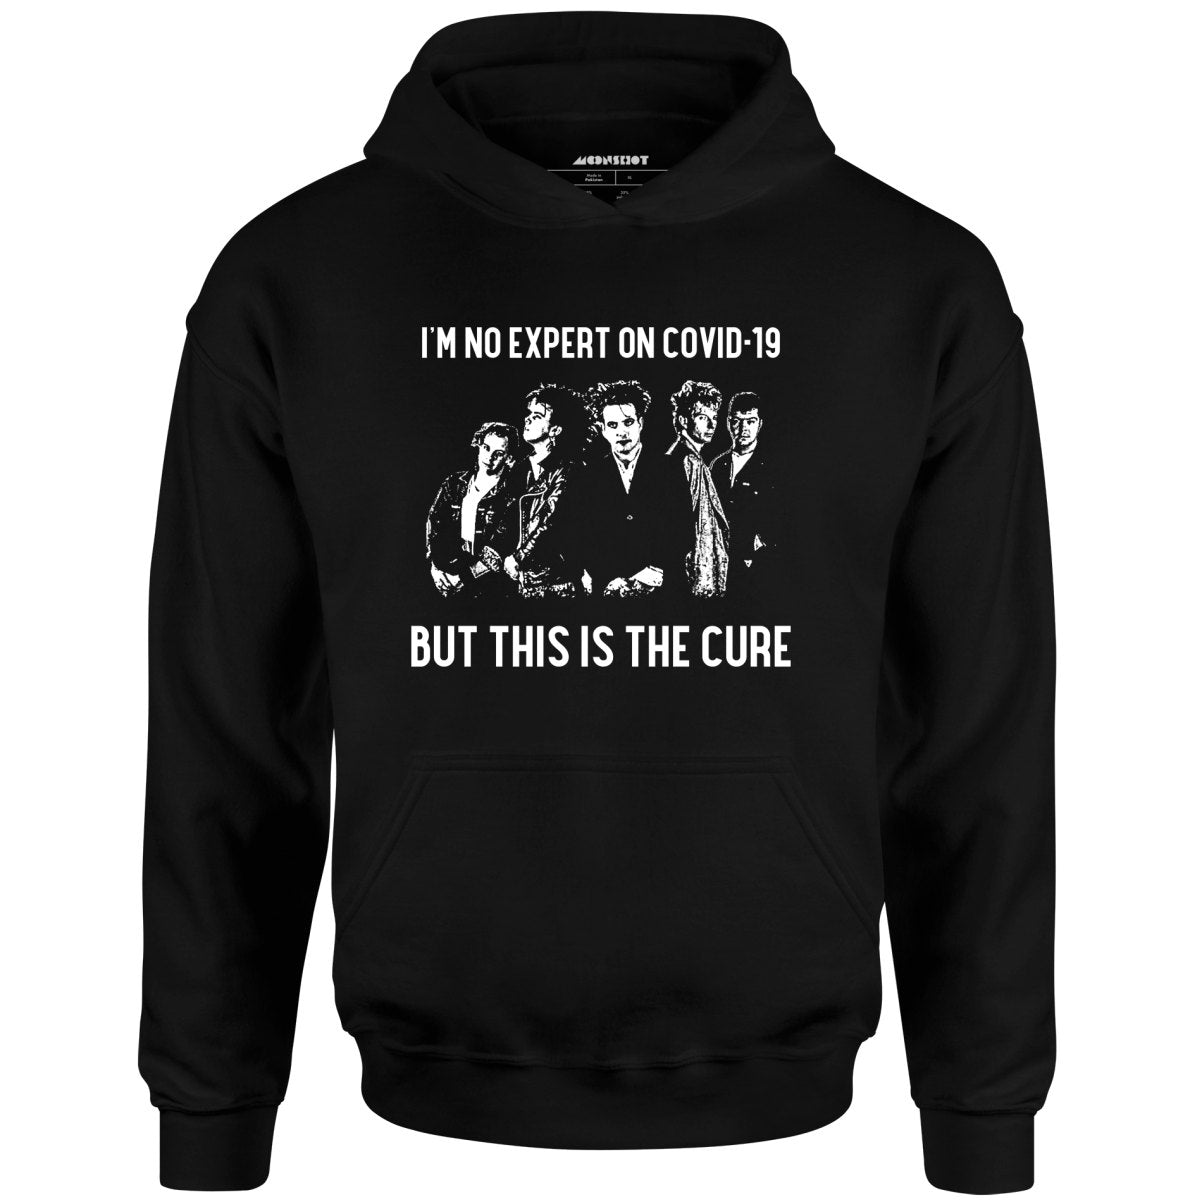 This is The Cure Mashup Parody - Unisex Hoodie